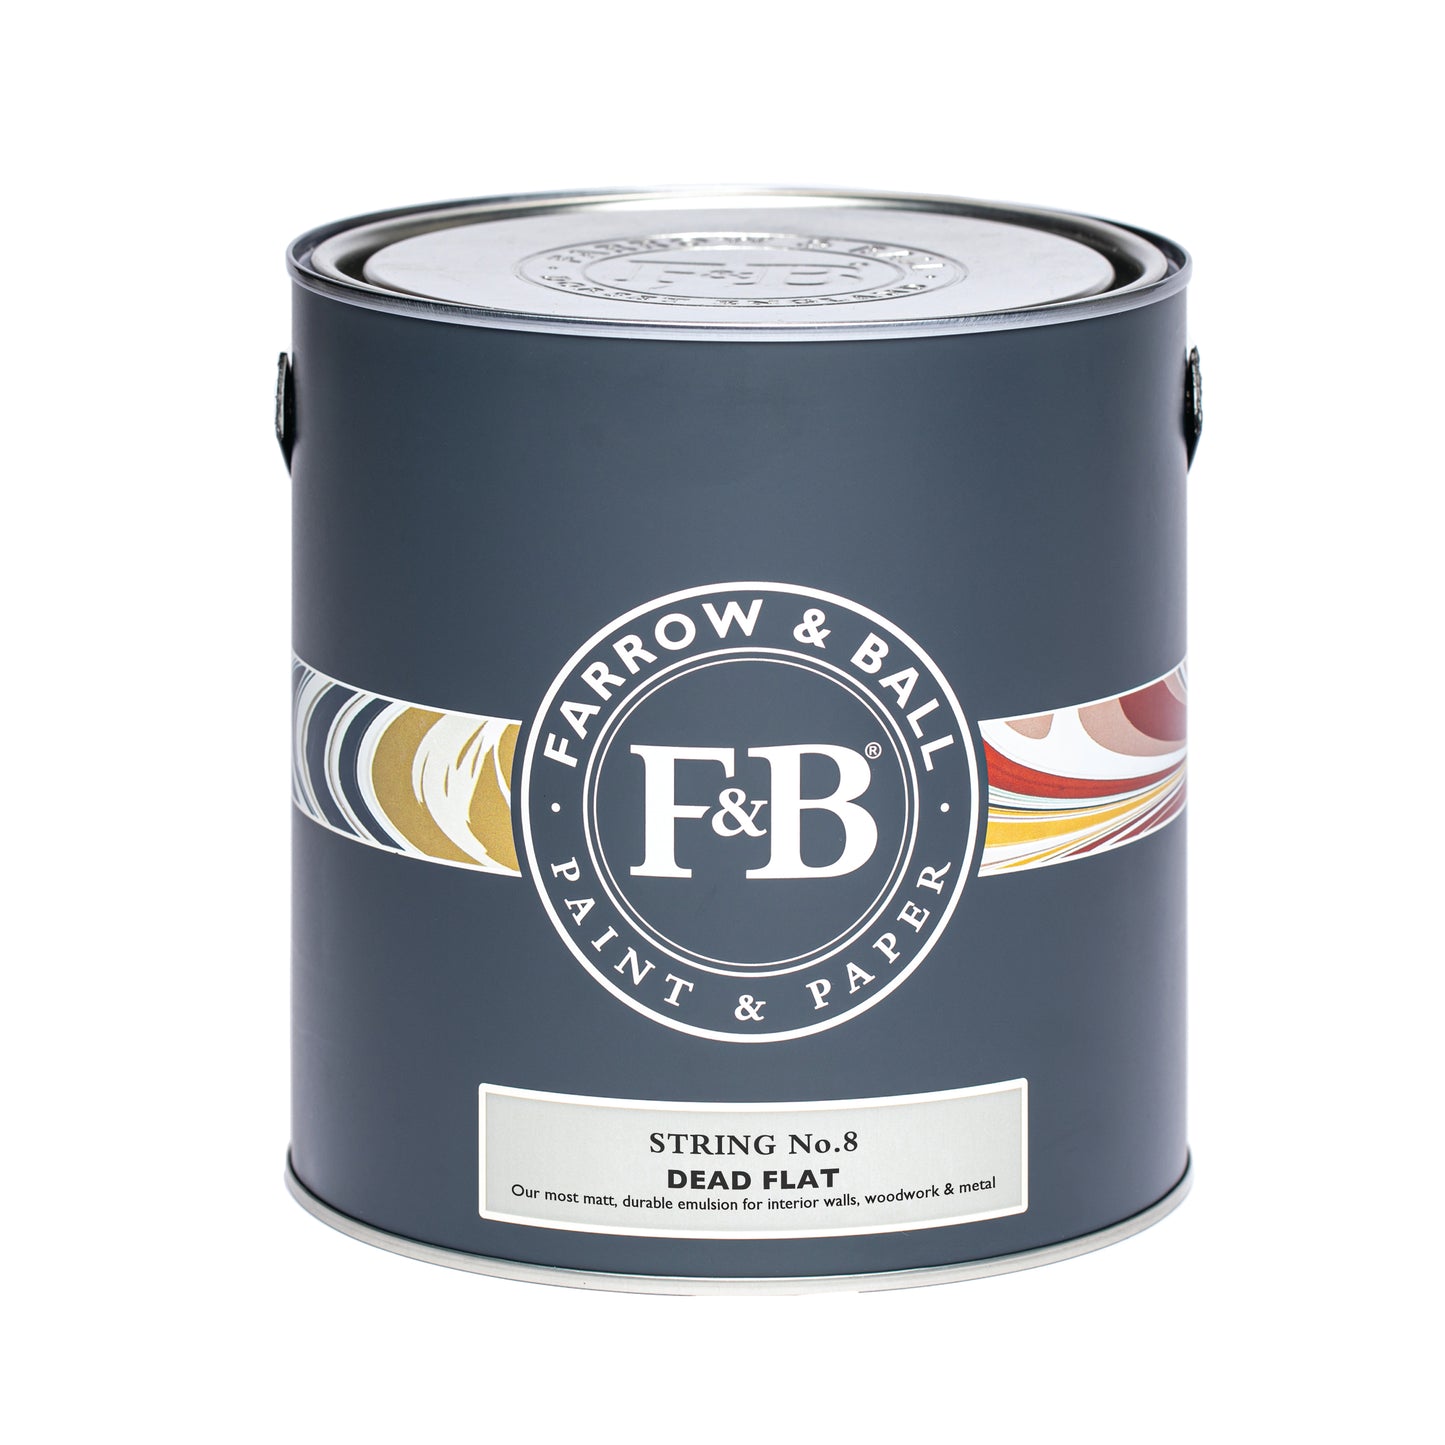 Dead Flat - Farrow and Ball - String 8 - Allround